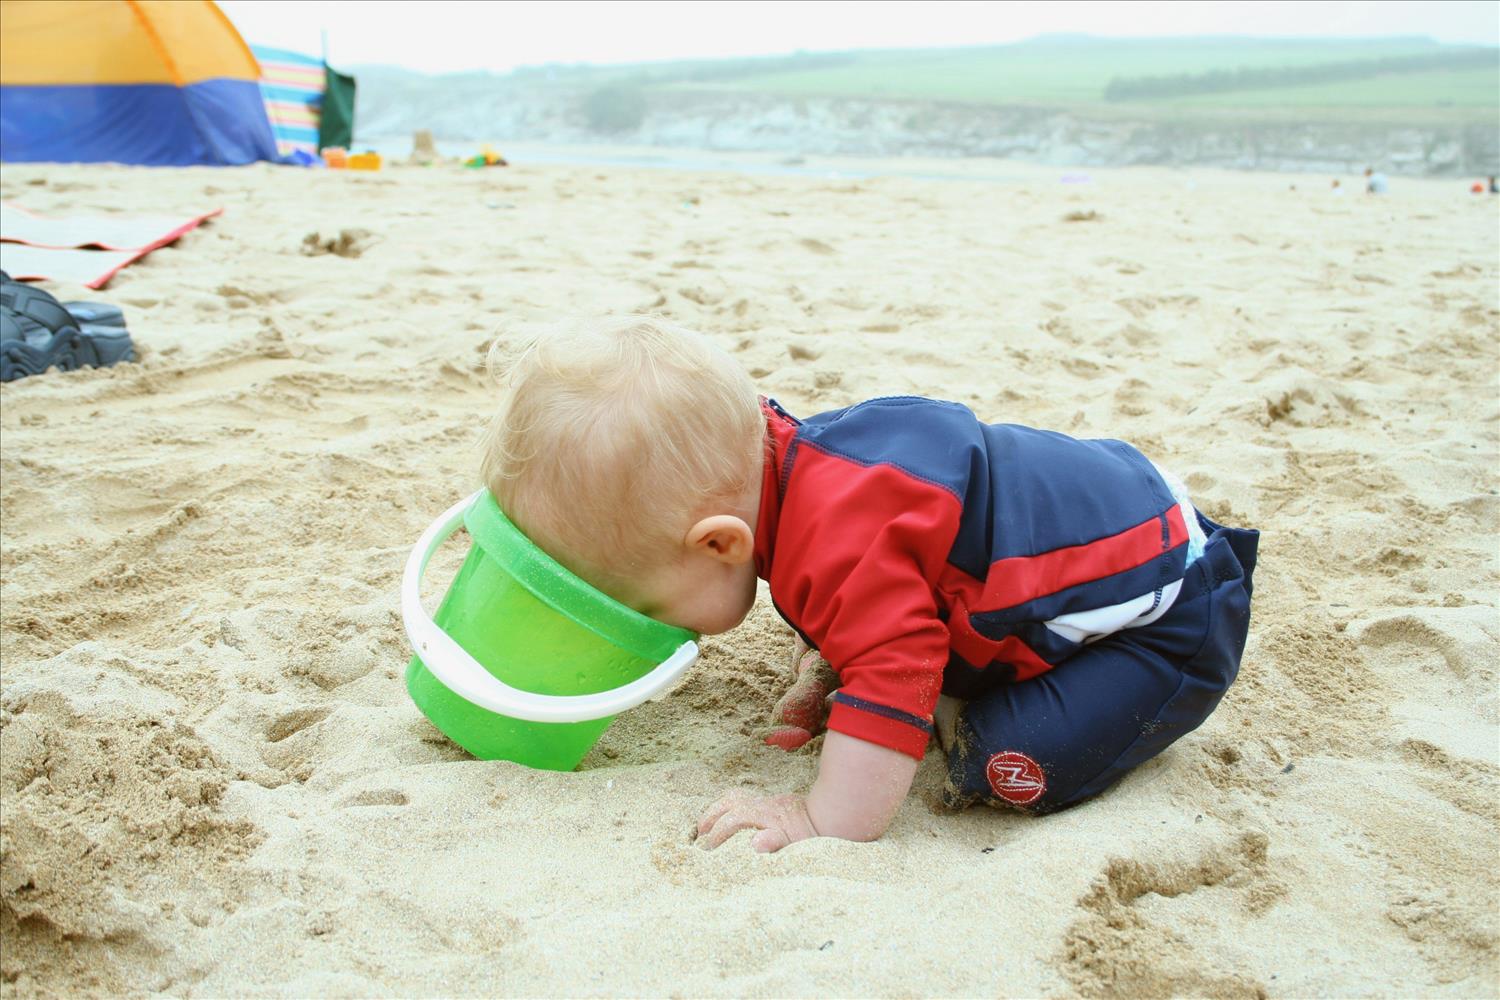 Young boy on the beach closely inspecting the contents of his bucket